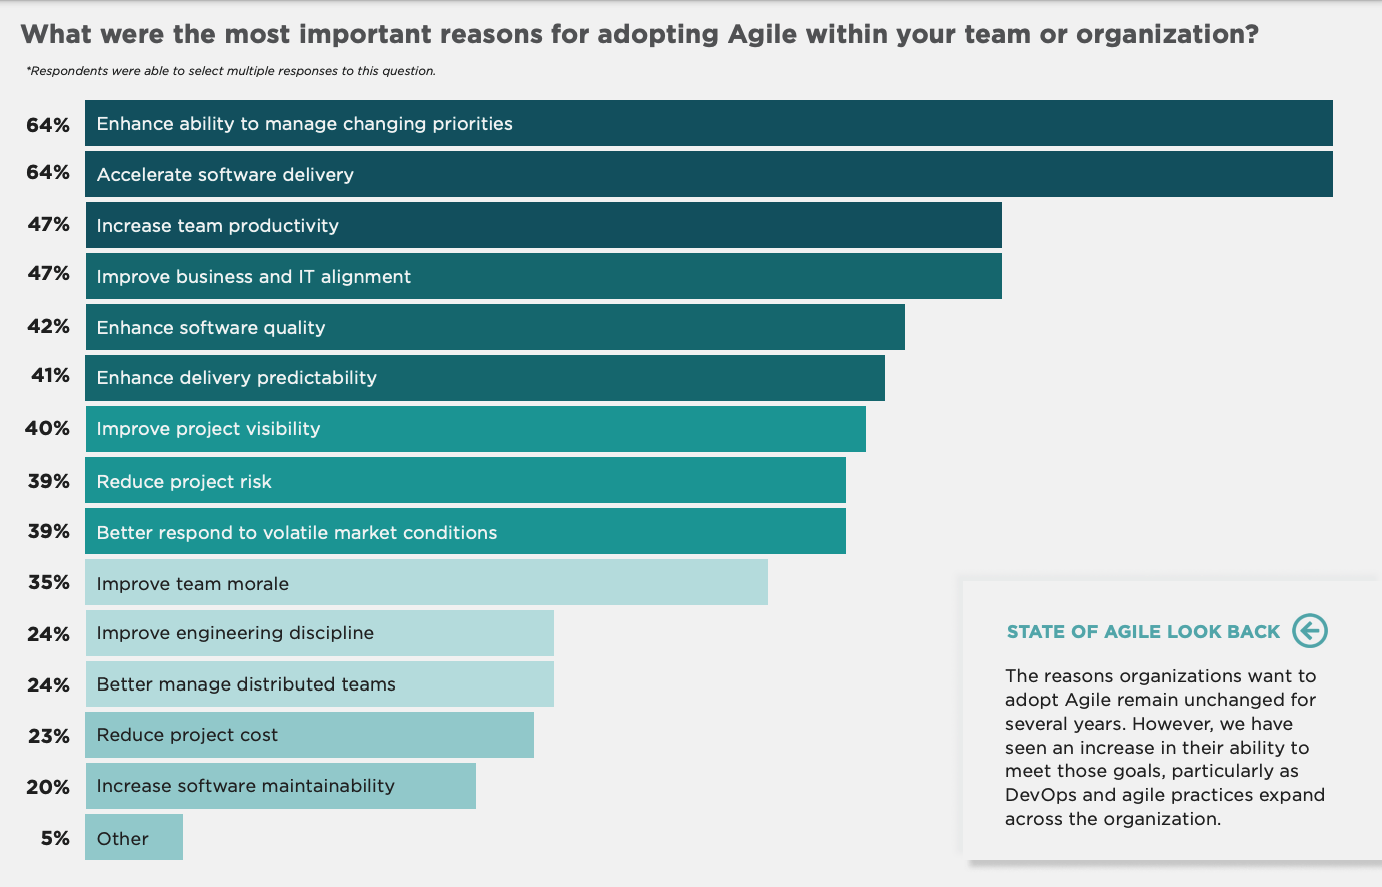 Reasons for implement Agile with Latam outsourcing